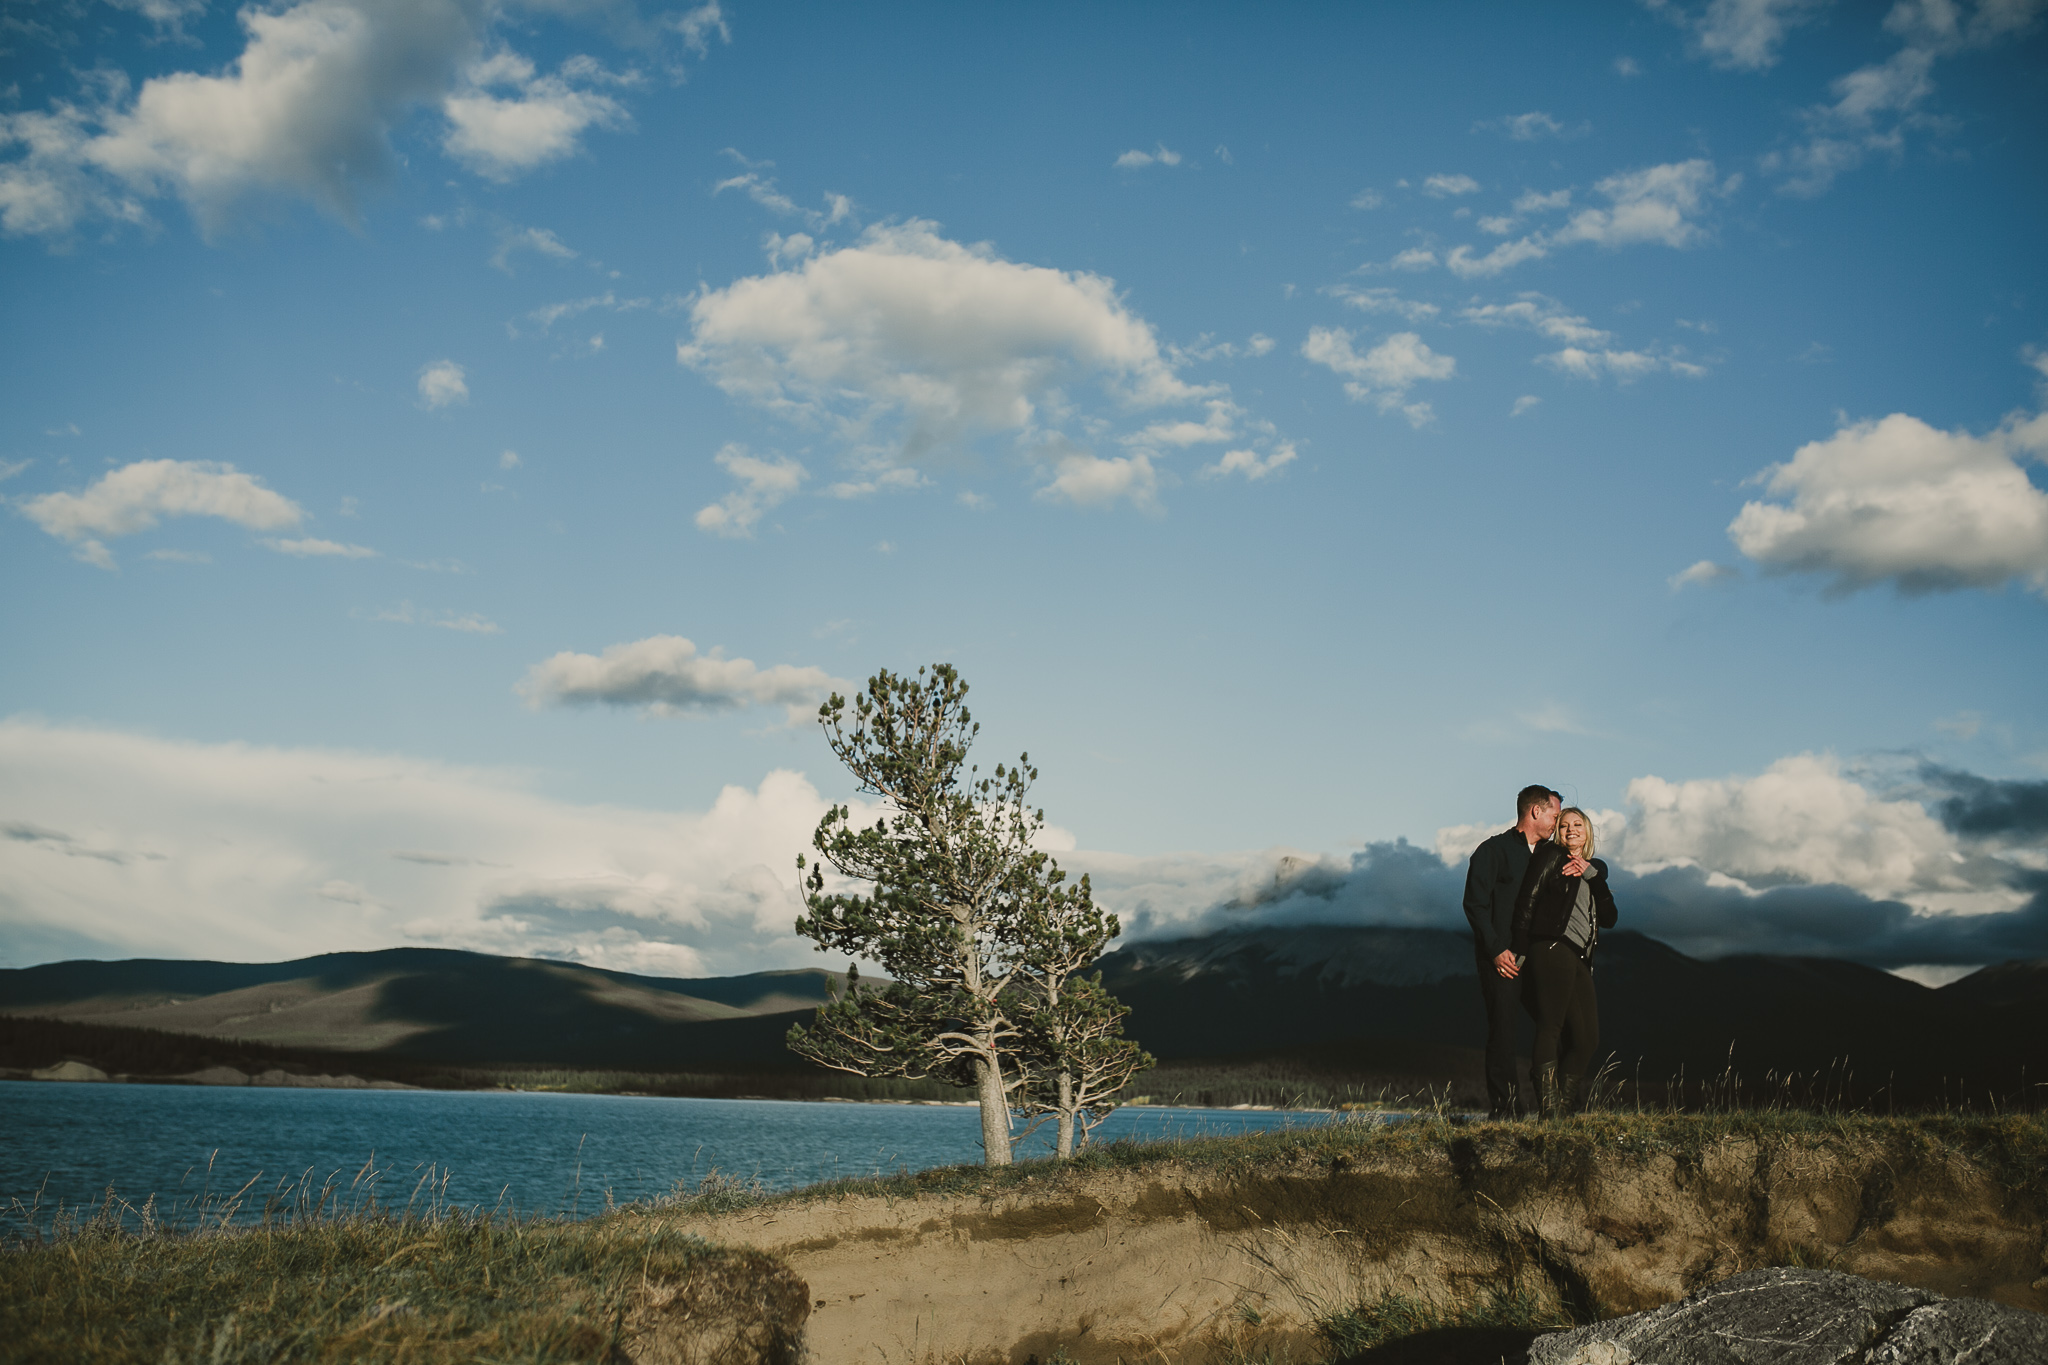 man and woman embracing in the mountains near a blue lake